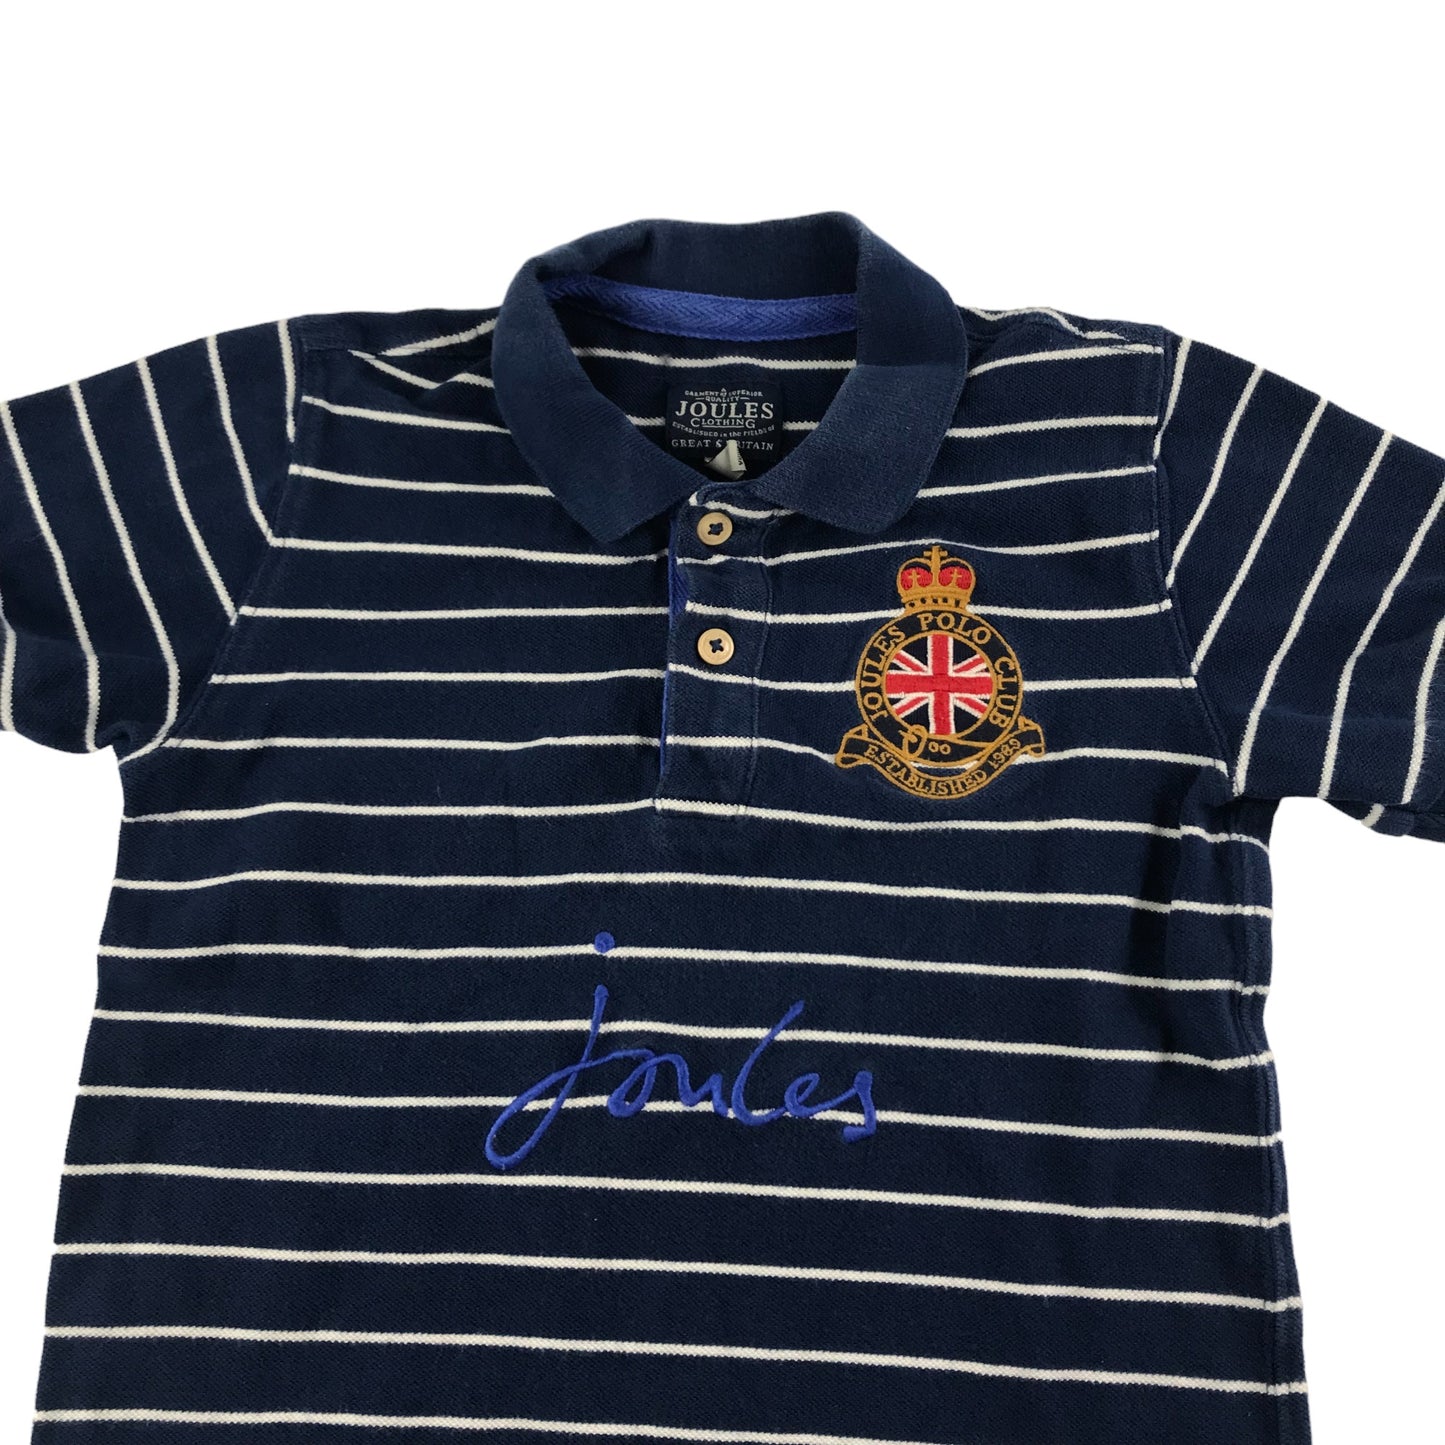 Joules Polo Age 7 Shirt Navy Short Sleeve white stripes